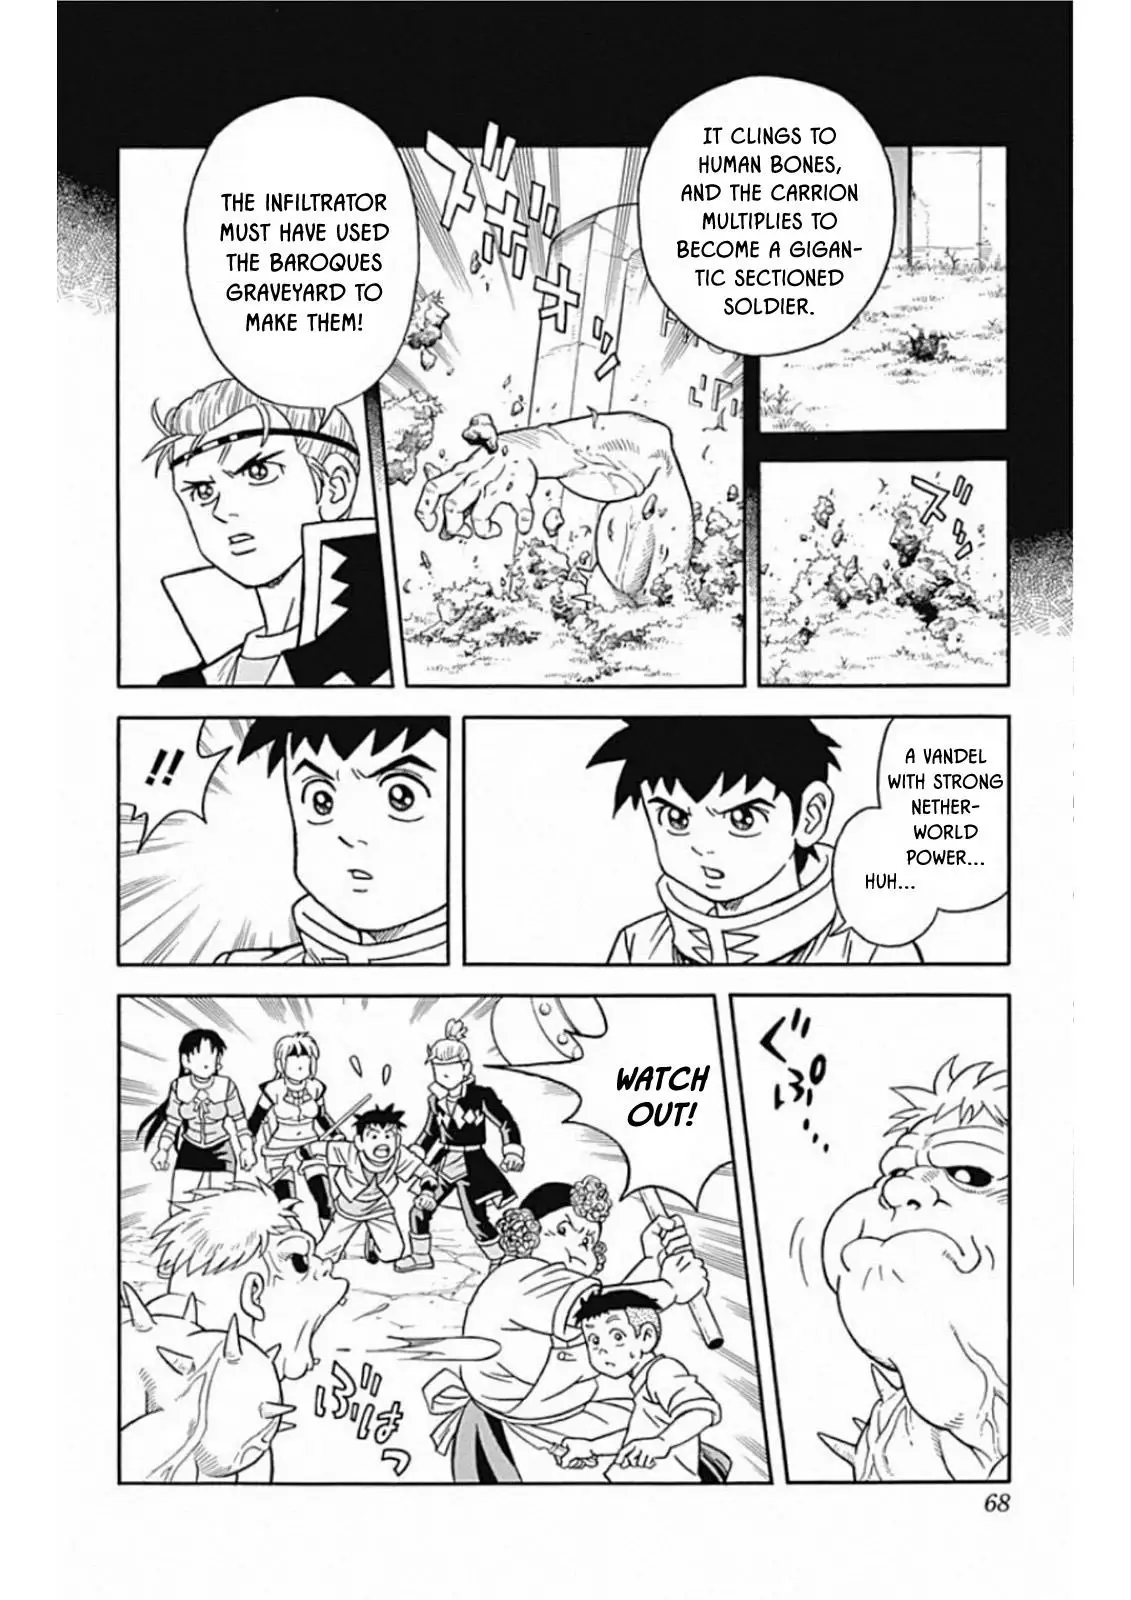 Beet The Vandel Buster - 59 page 20-8cbc0952